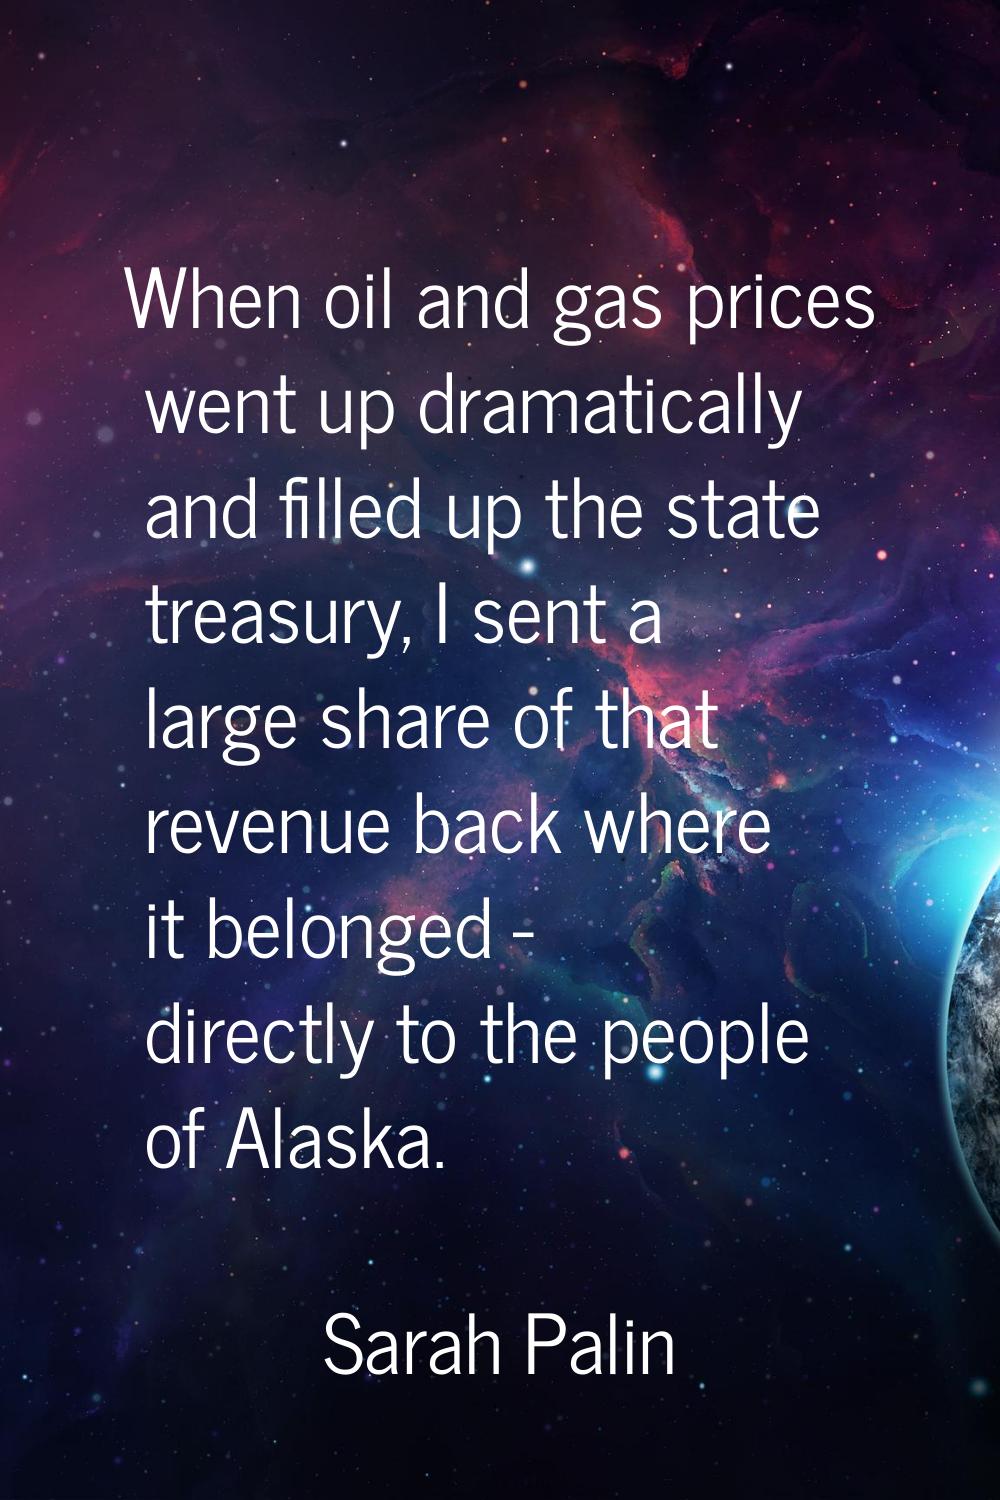 When oil and gas prices went up dramatically and filled up the state treasury, I sent a large share